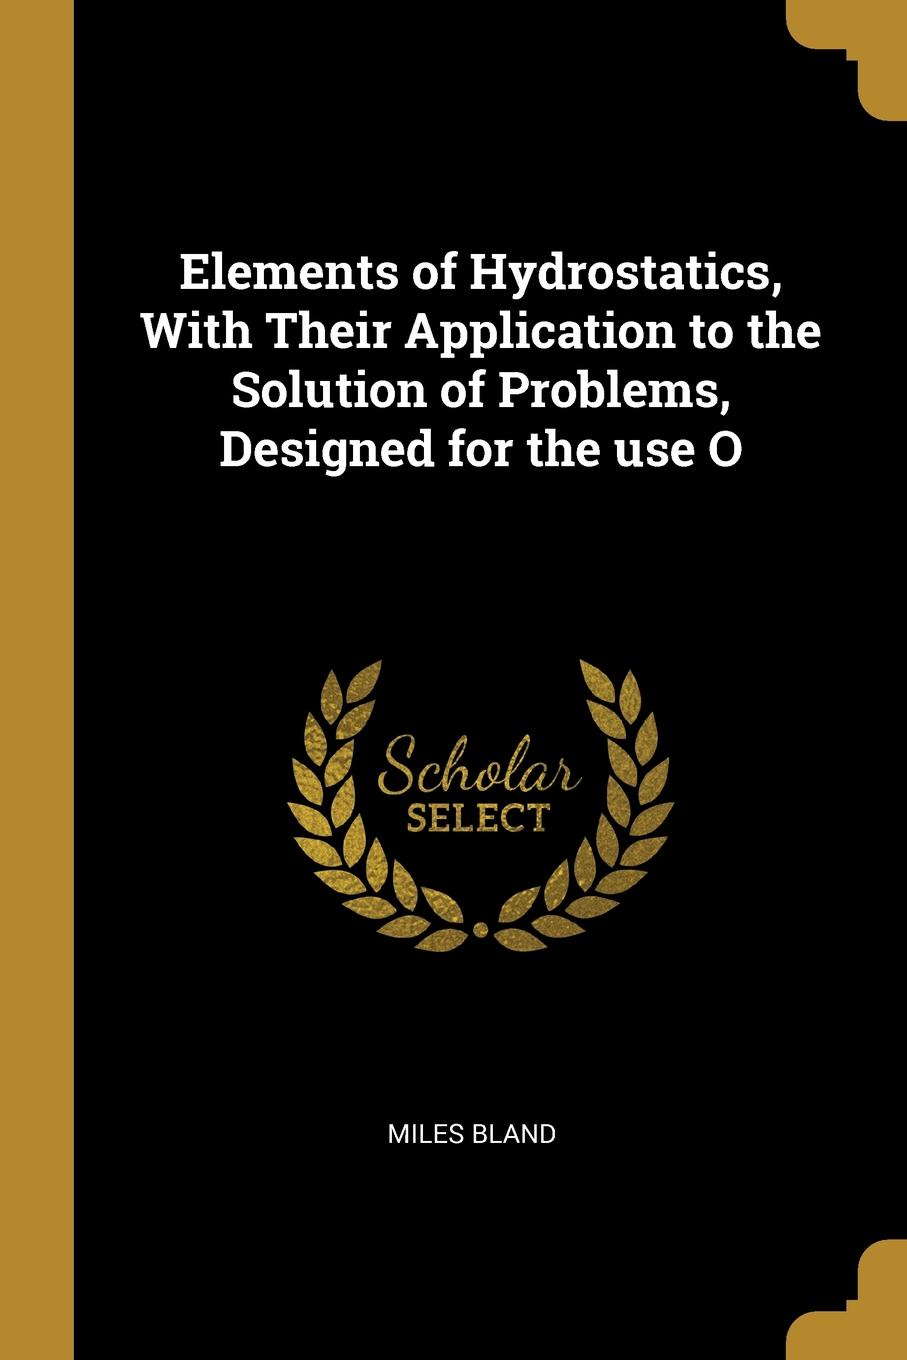 Elements of Hydrostatics, With Their Application to the Solution of Problems, Designed for the use O